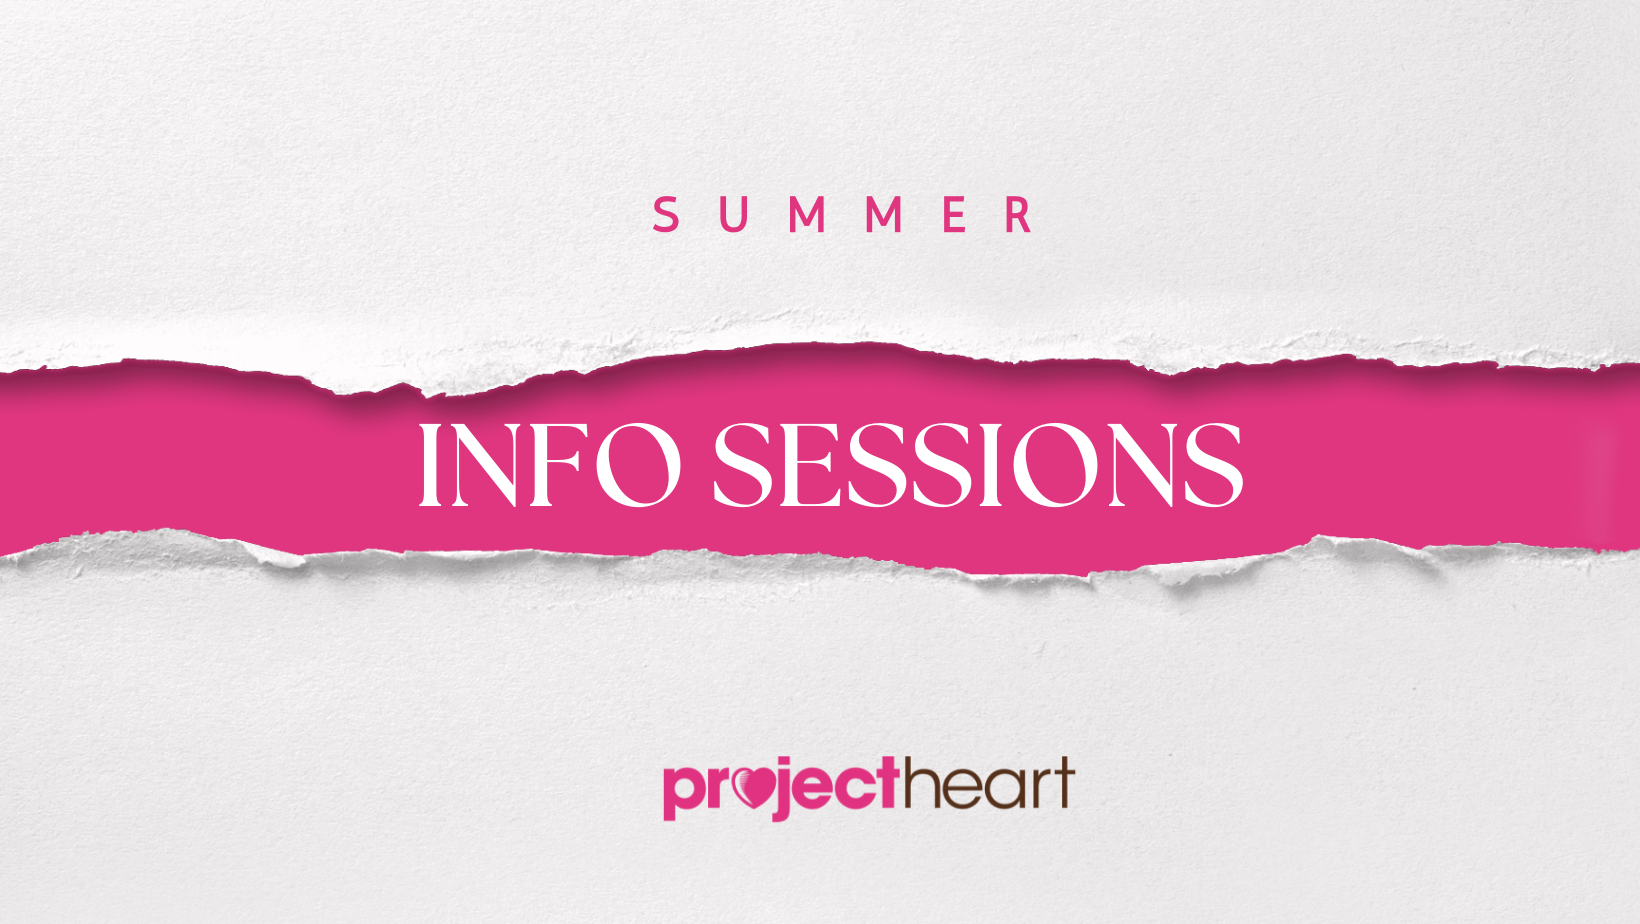 More Summer Inspiration - Sign Up for a Project Heart Info Session!